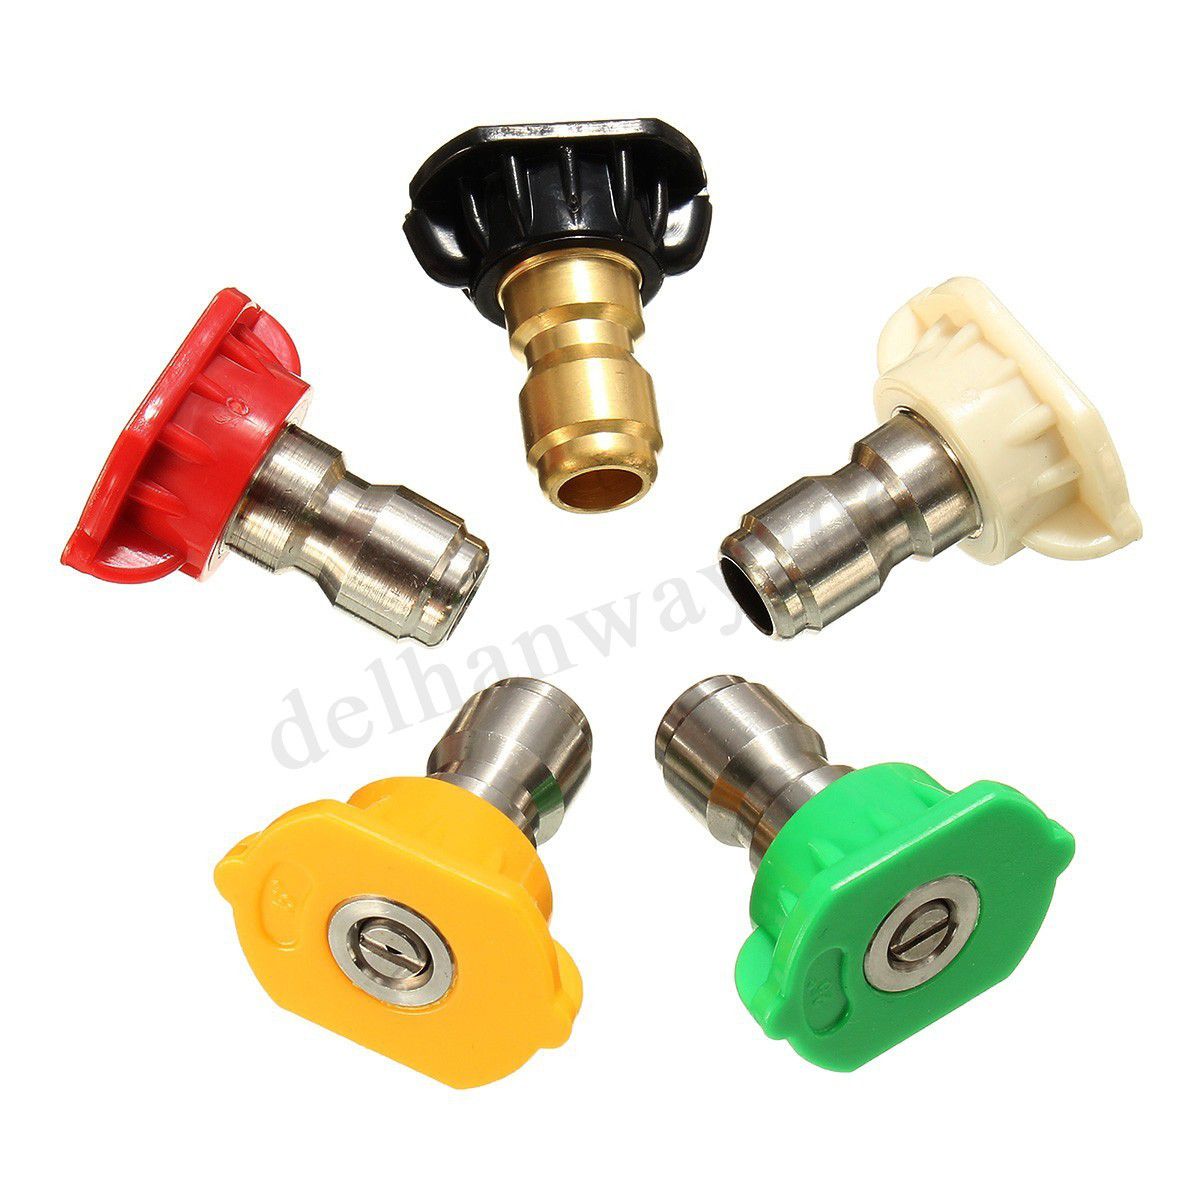 Pressure Washer Spray Nozzle Tips - 1/4 Quick Connection Design 2.5 GPM (5 Pack)